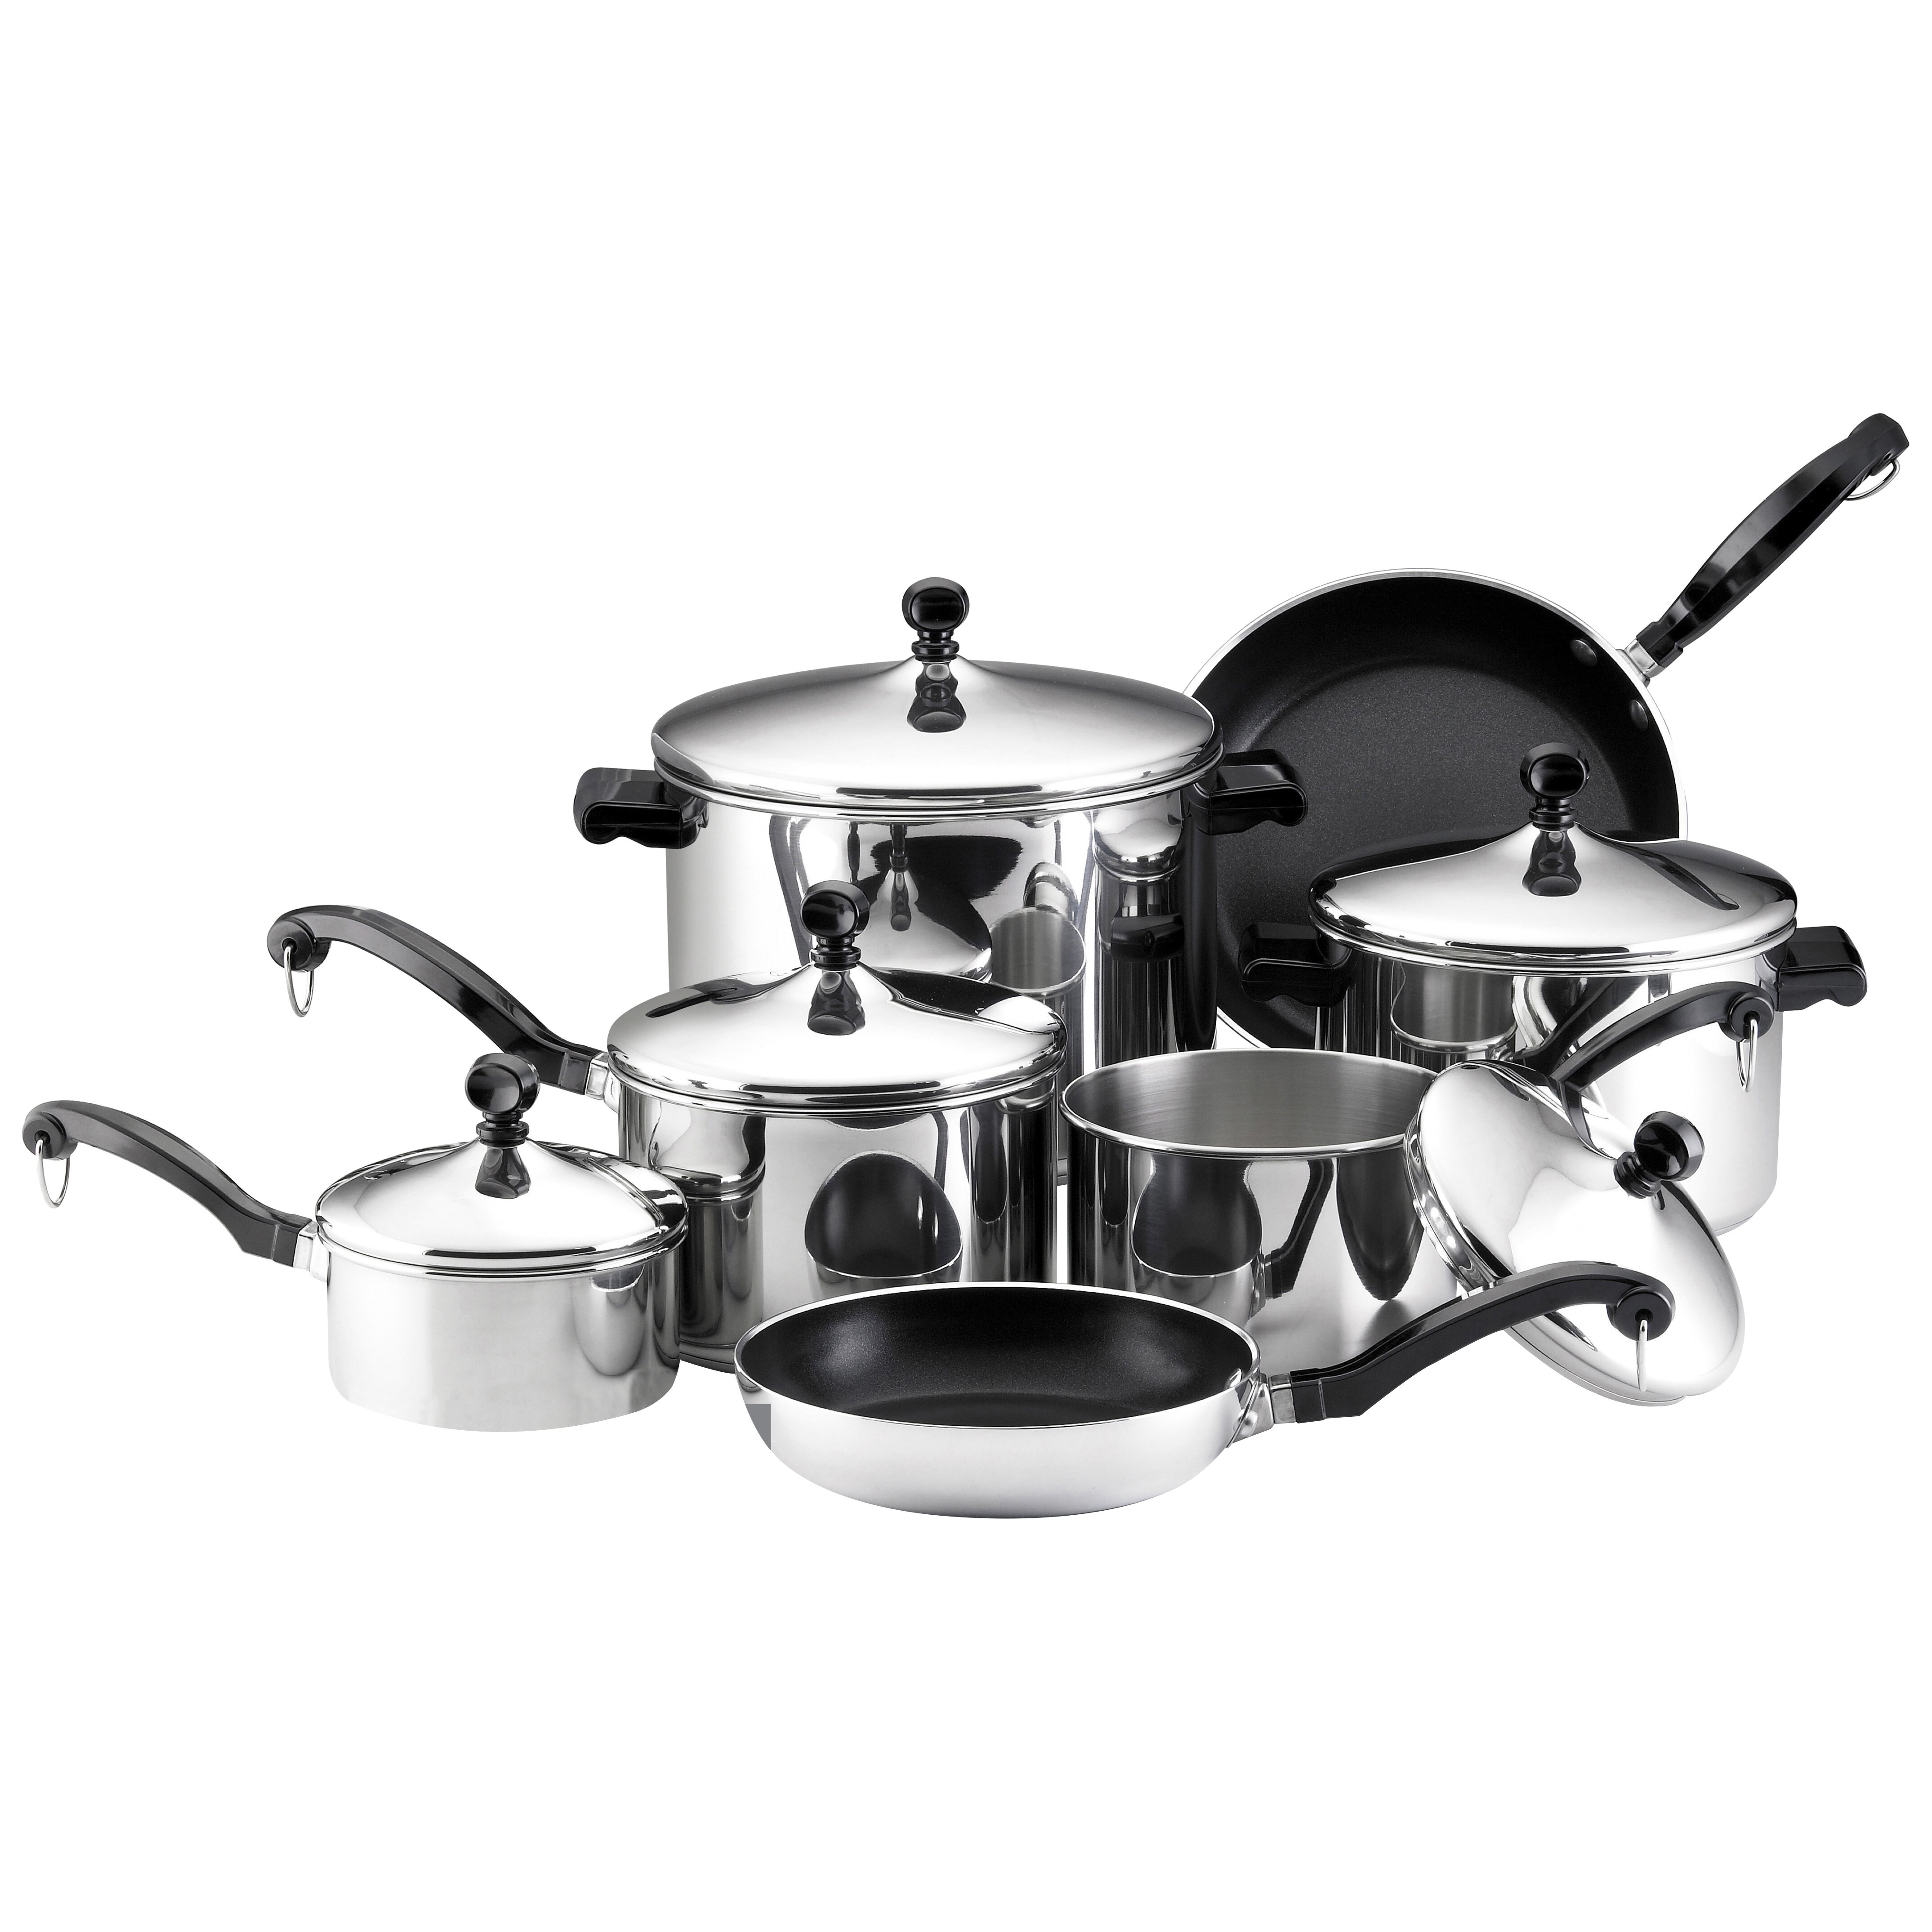 Farberware Stainless Steel 15 Pc Cookware Set